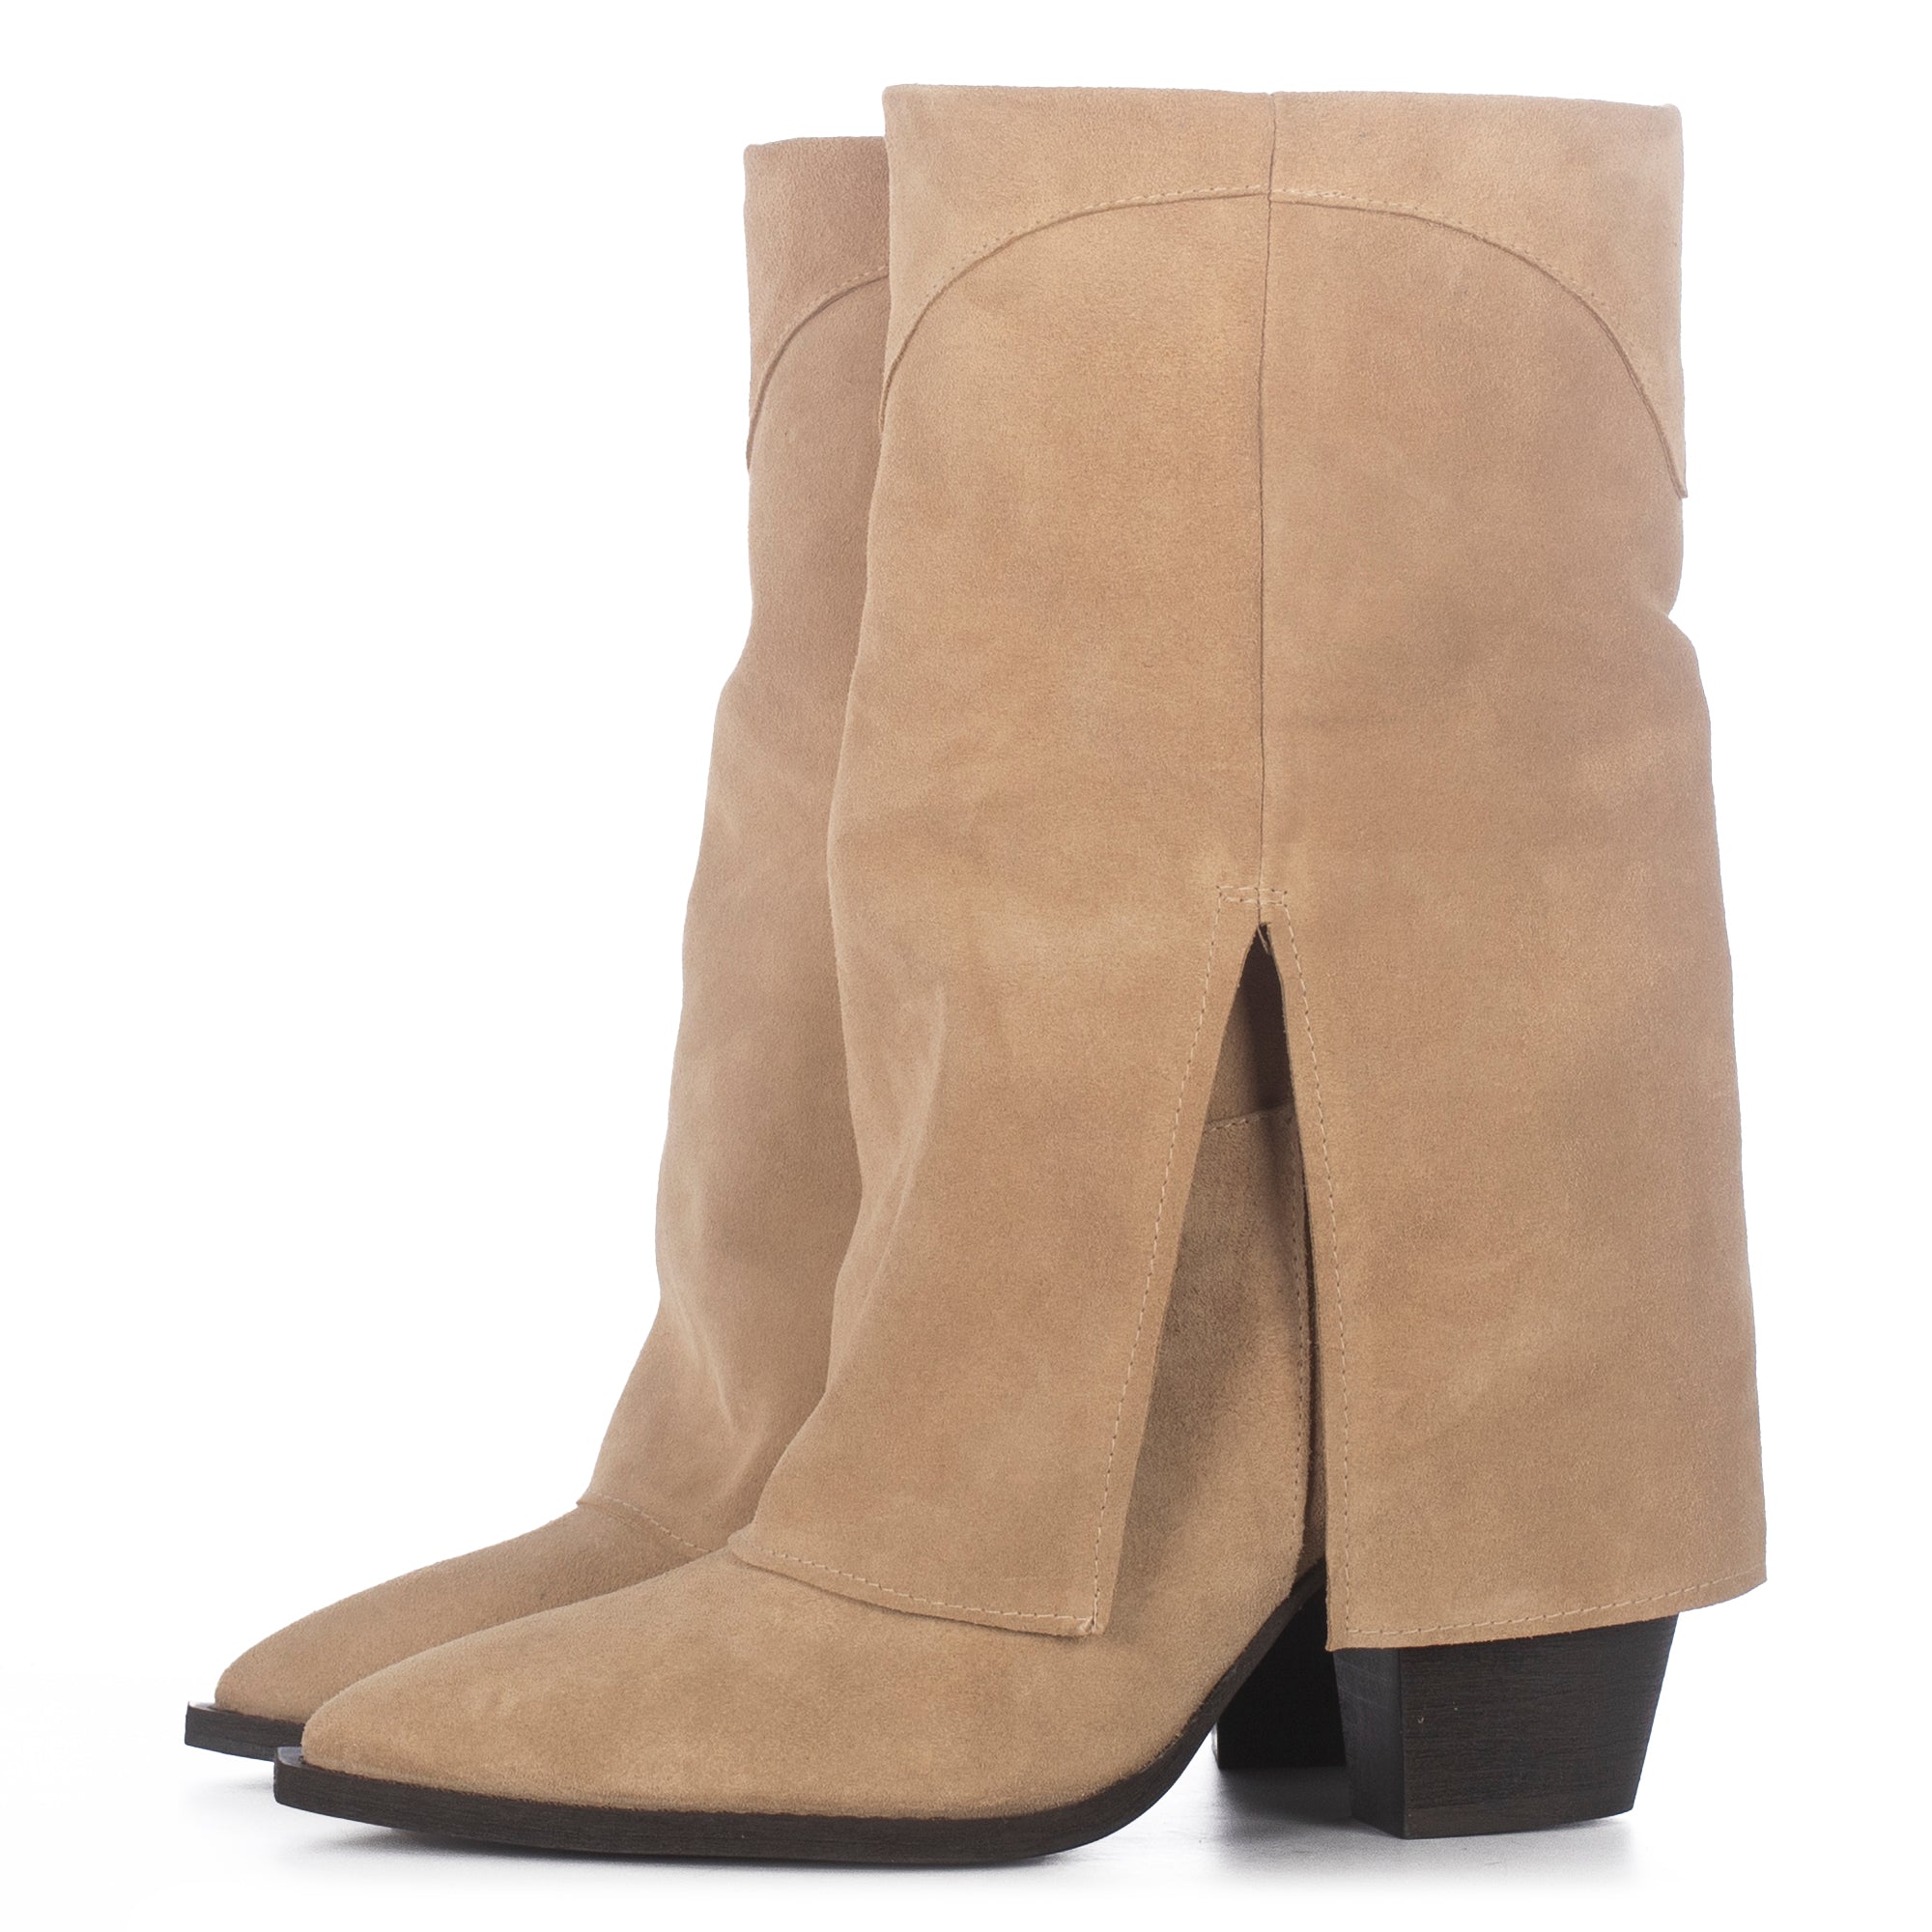 VEGAS SAND SUEDE BOOTS